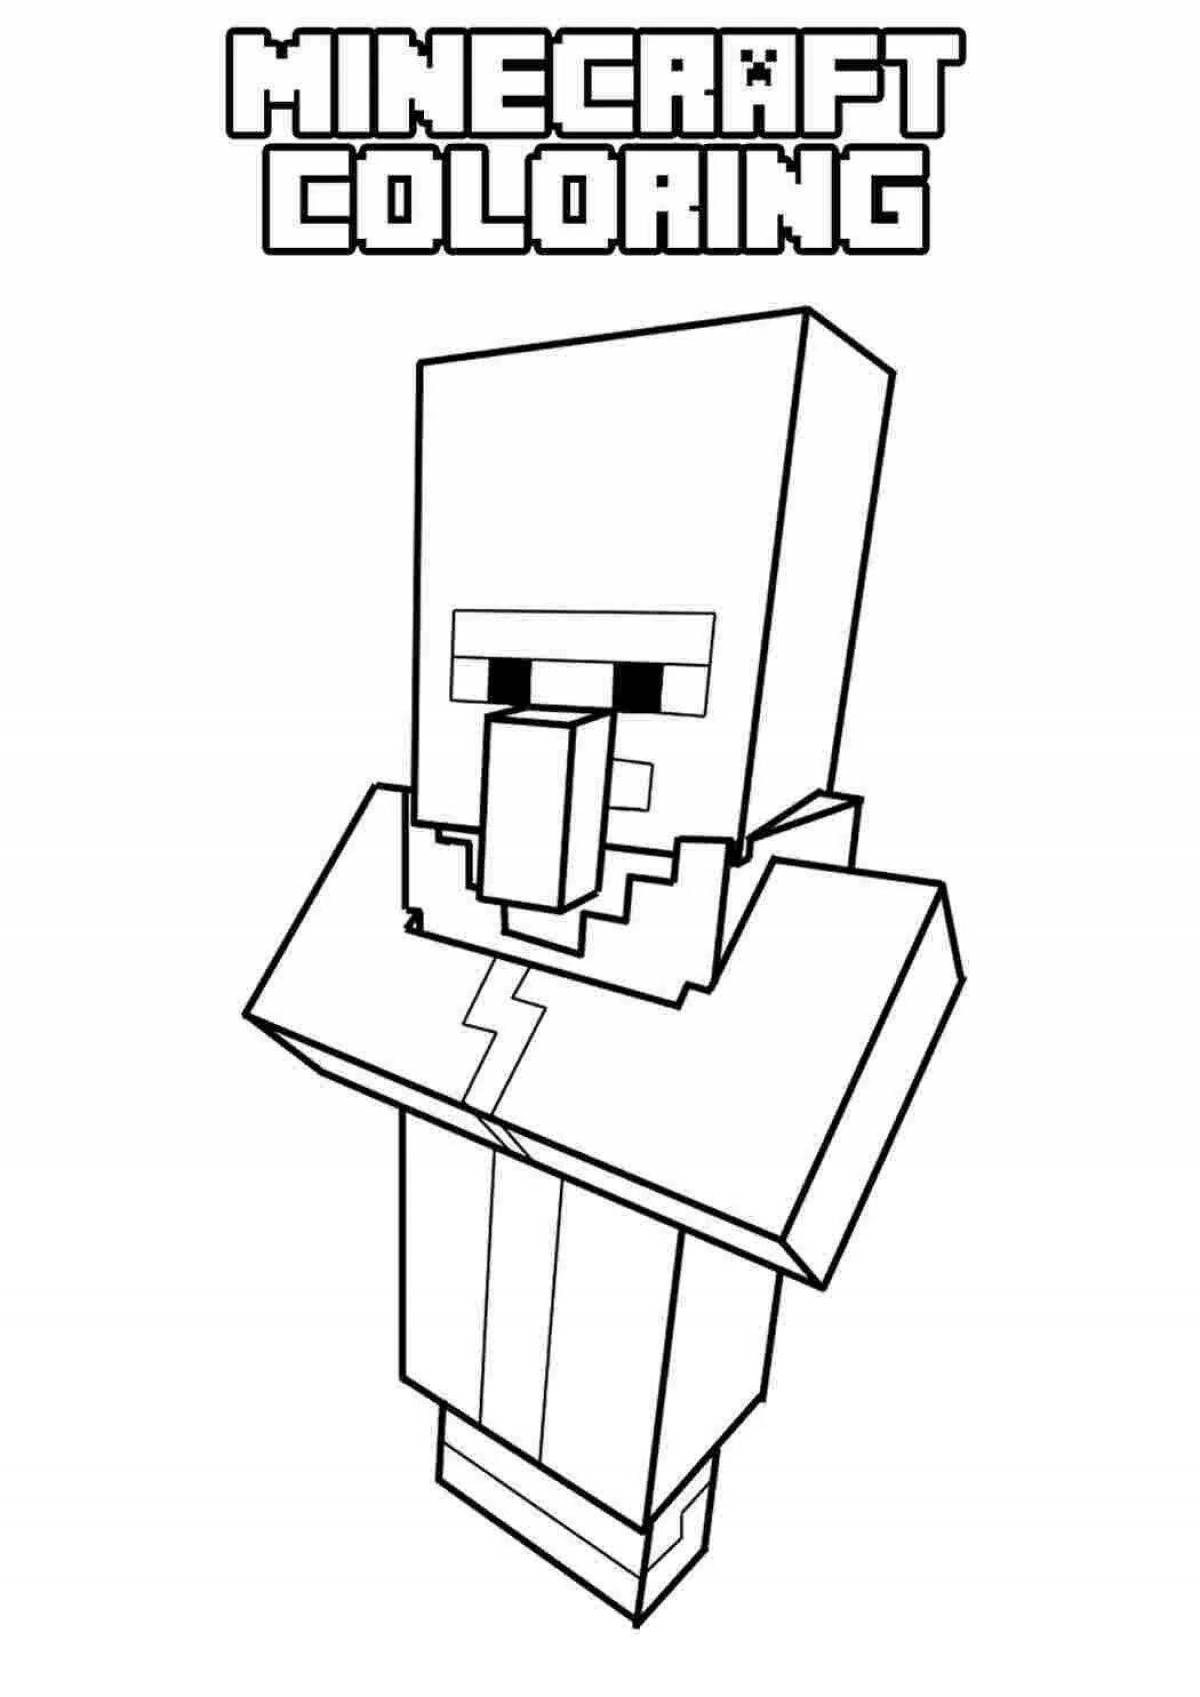 Awesome chicken minecraft coloring book